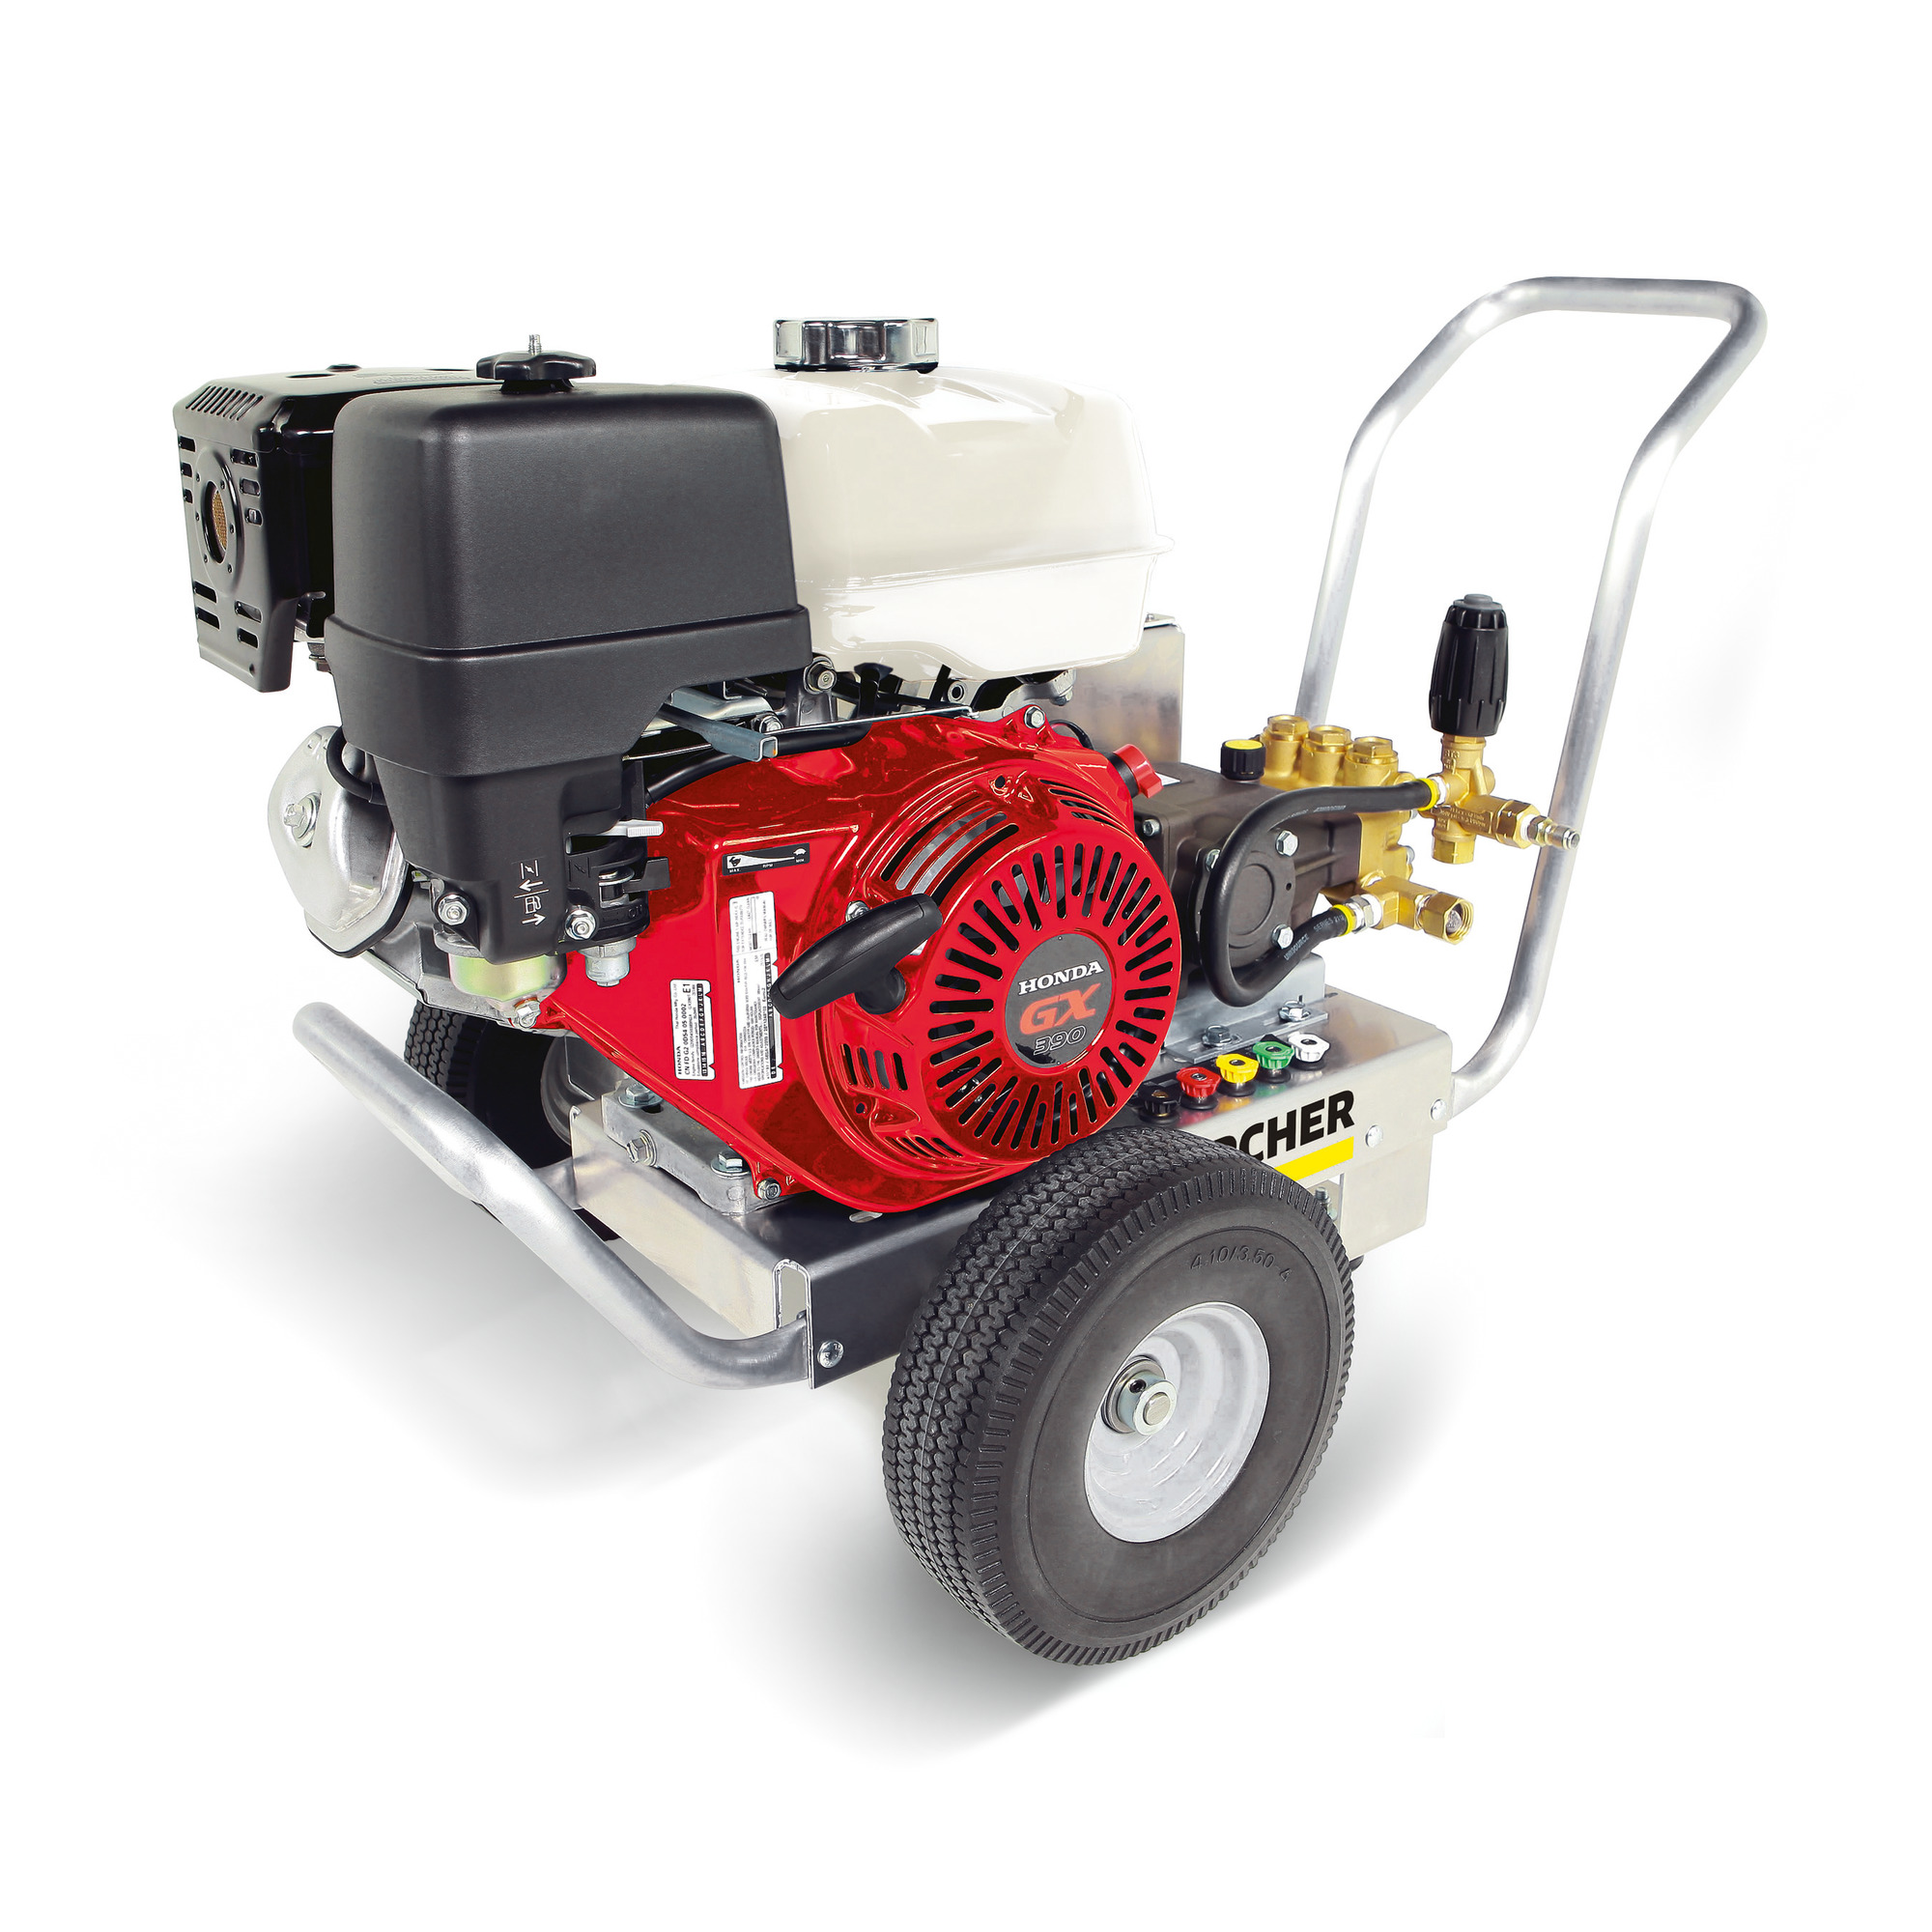 HD 3.5/35 AG ALUMINUM PRESSURE WASHER 3500PSI AND 